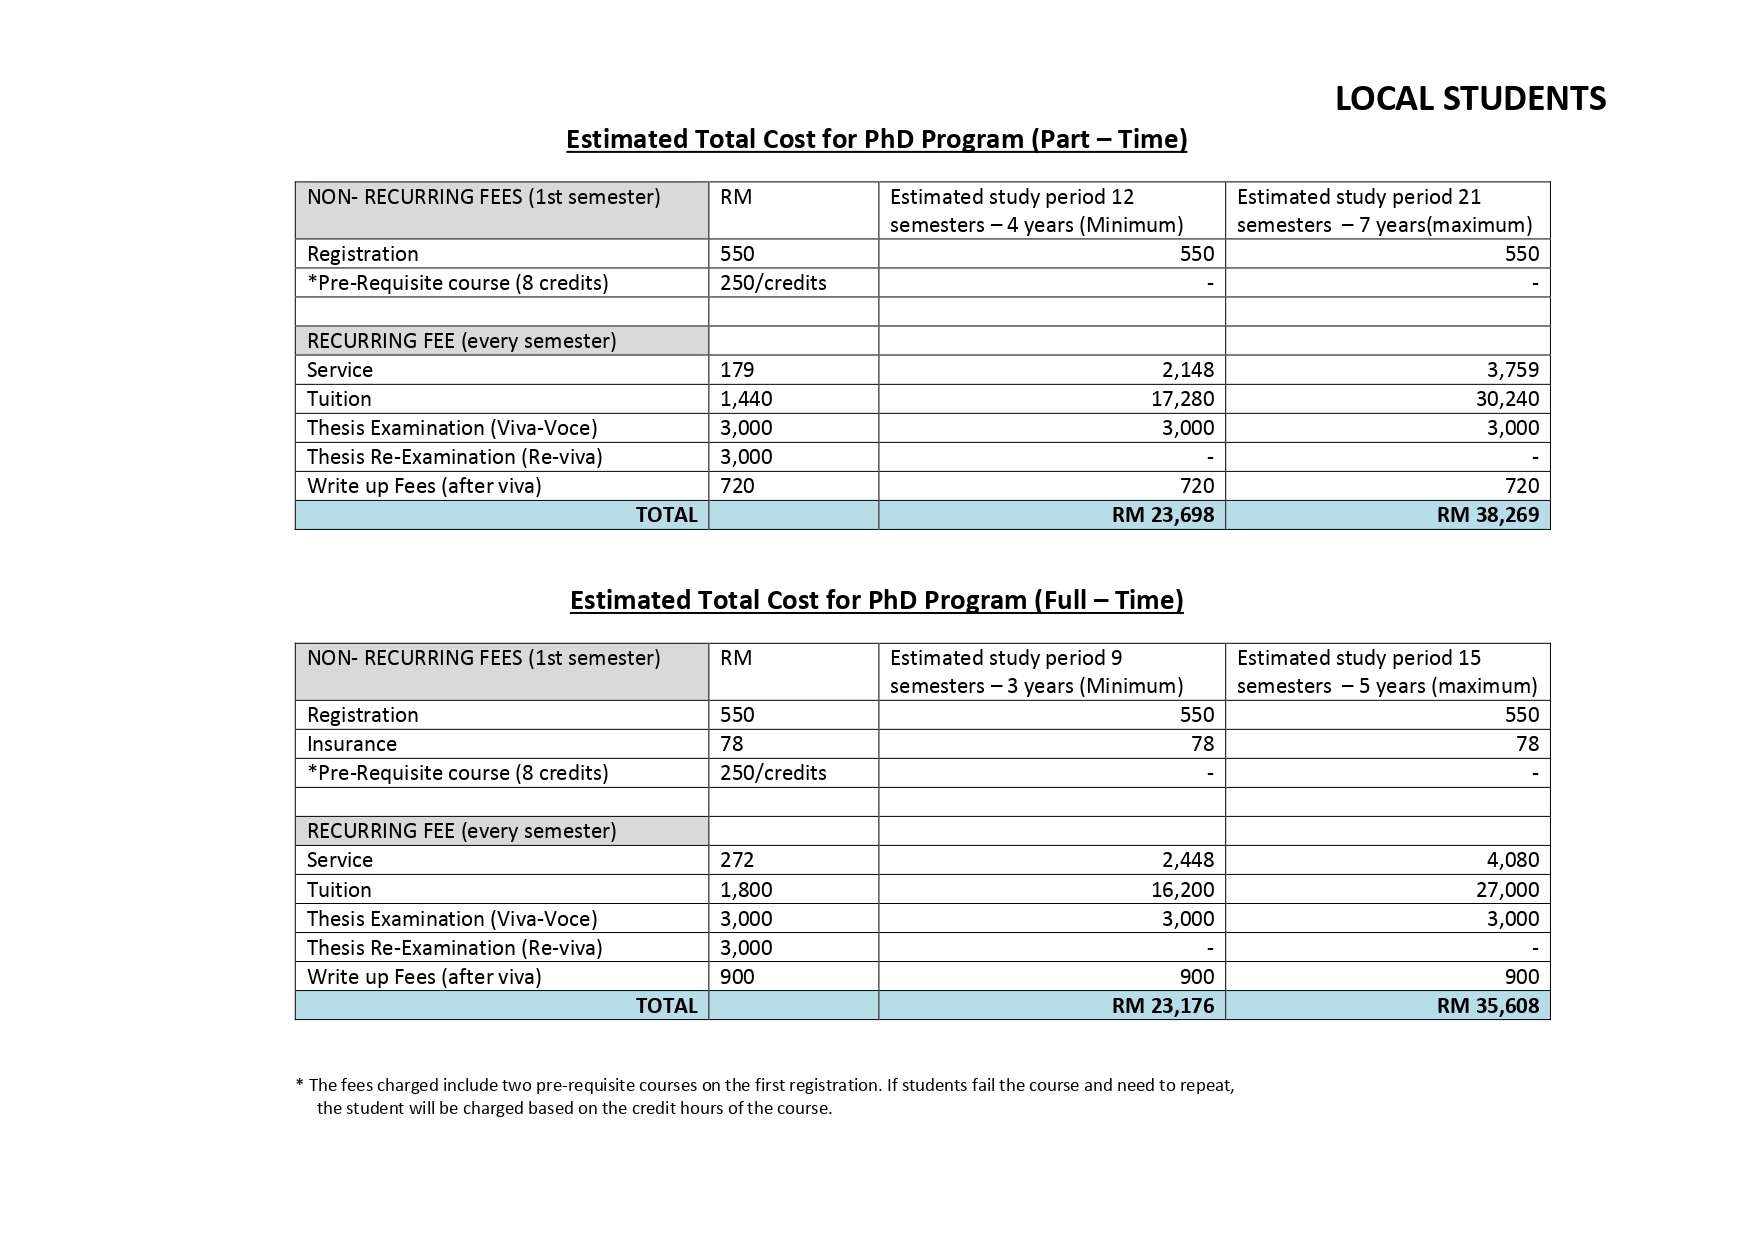 Estimated Total Cost for PhD Program Local Students page 0001